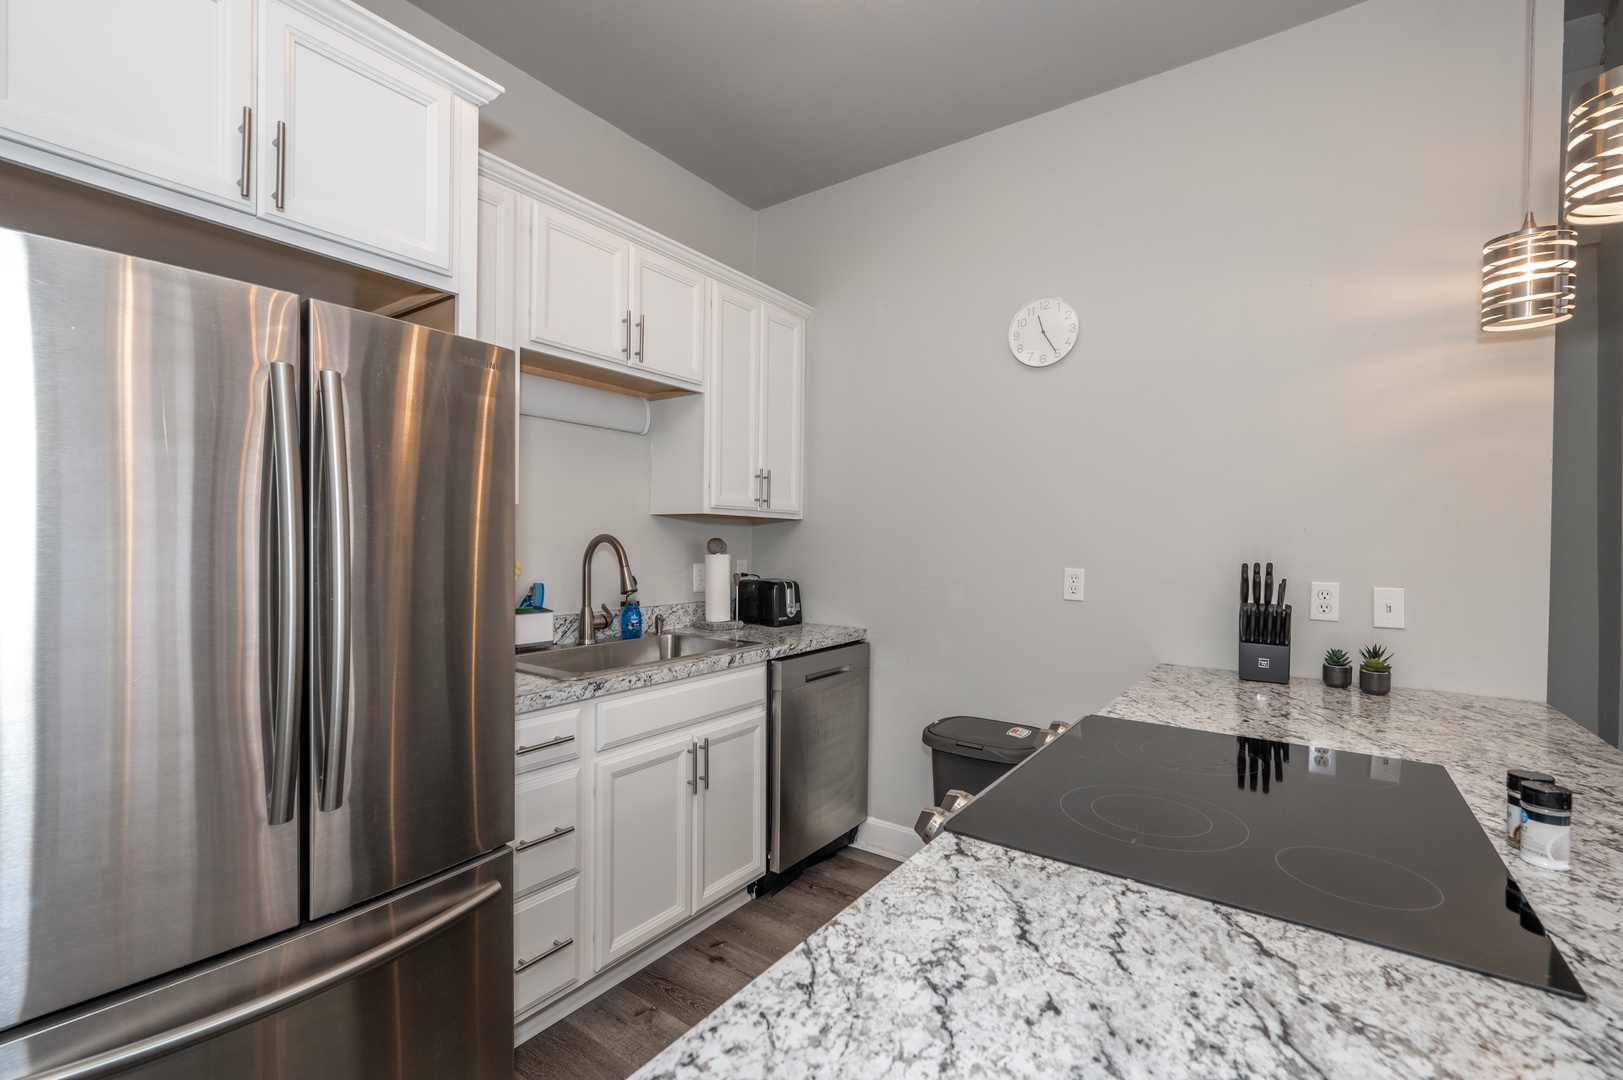 Unit 2: The well-equipped kitchen is spacious and open to the living area